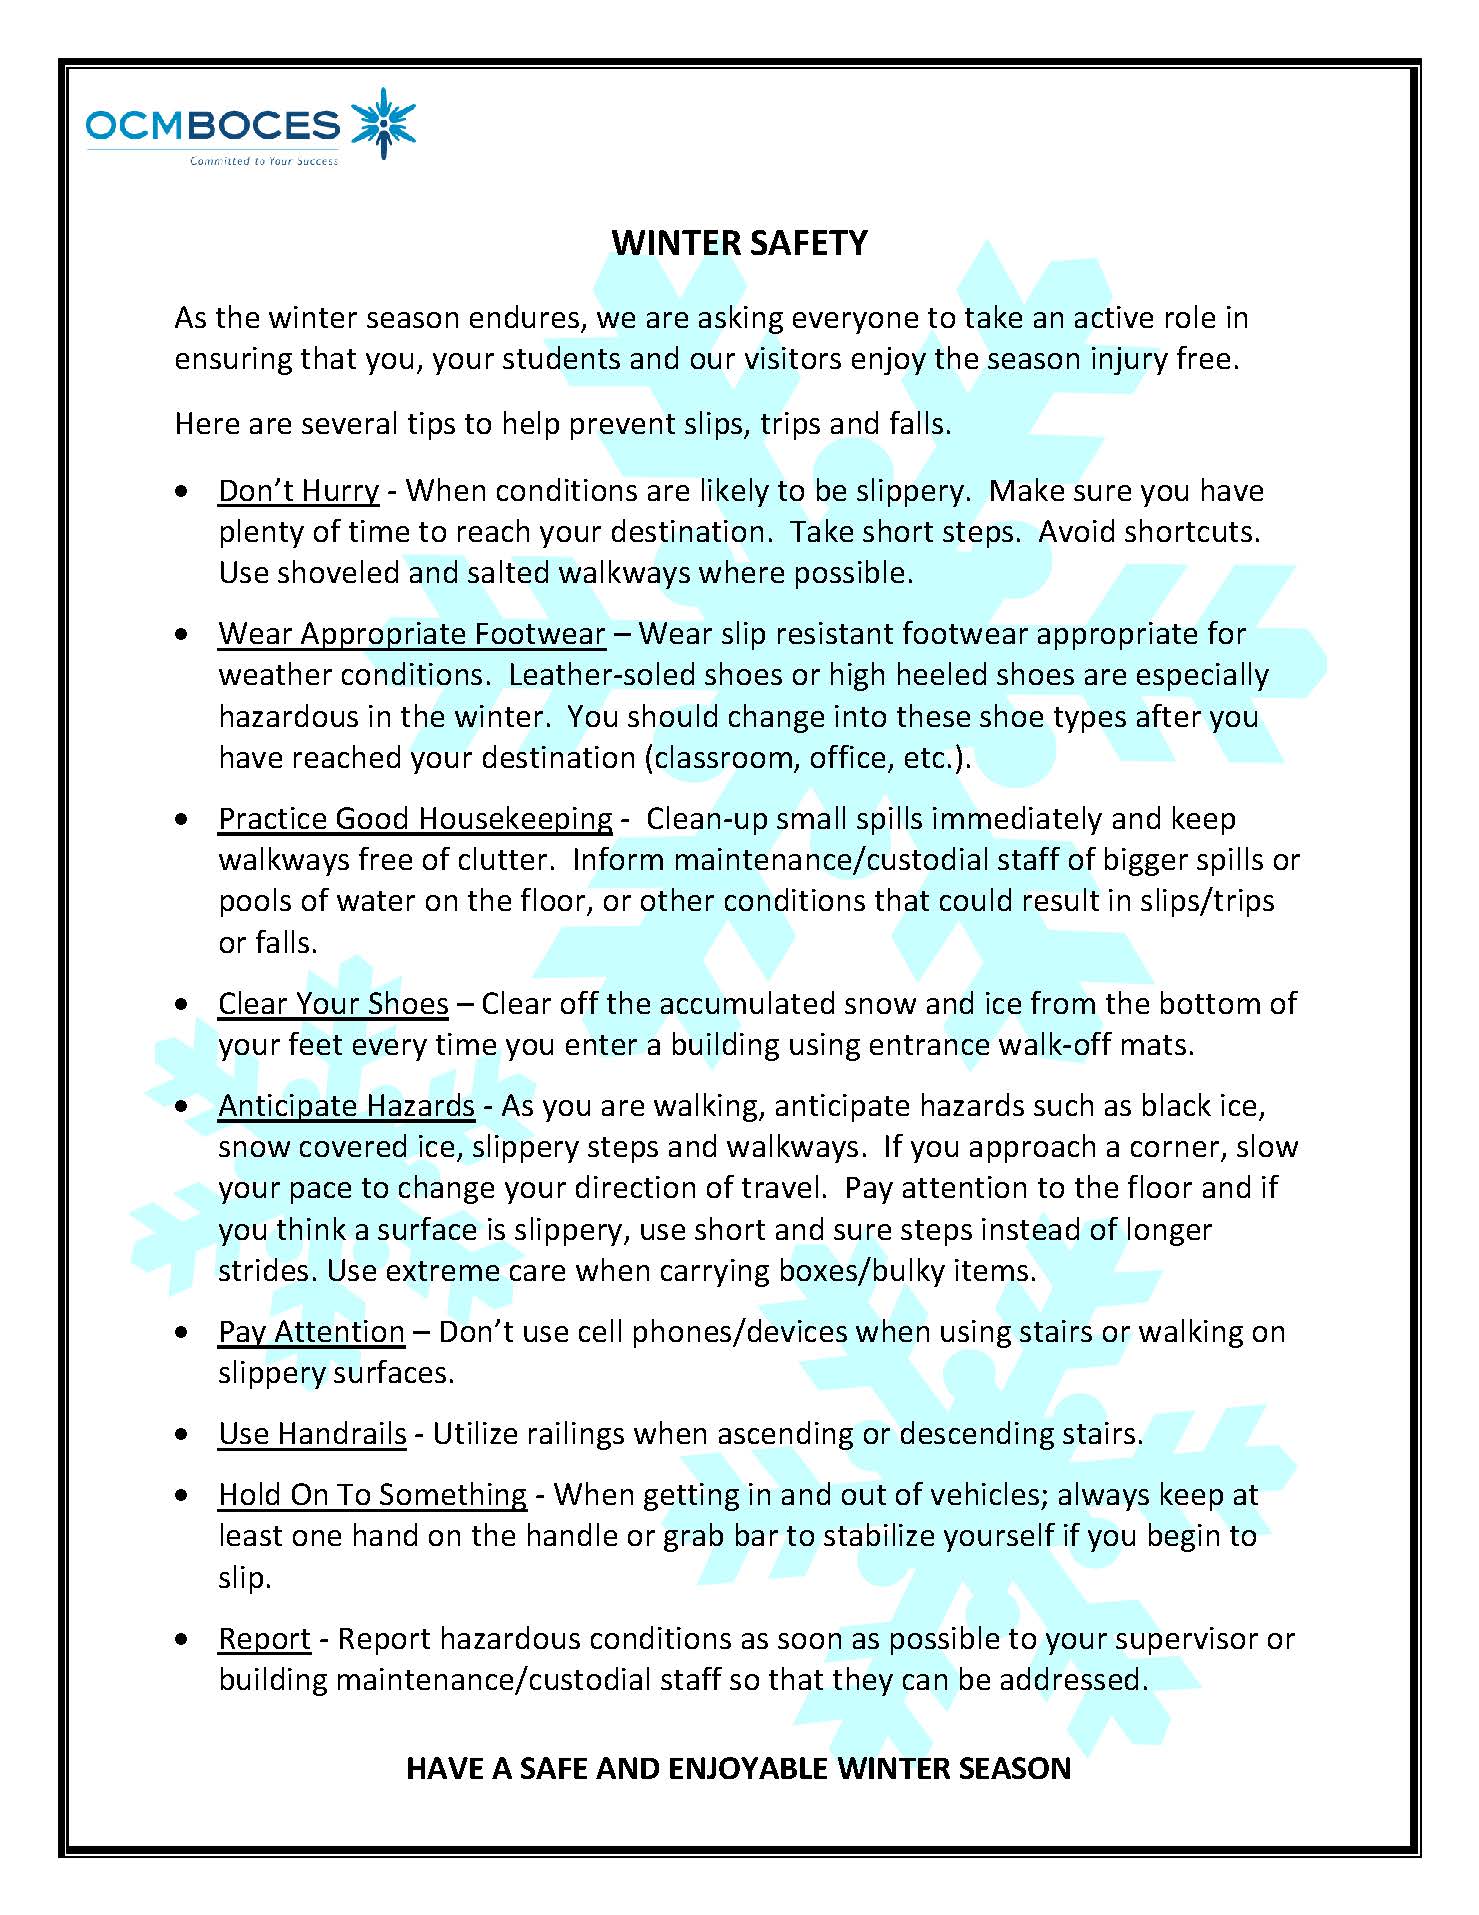 Winter Safety Tips from OCM BOCES